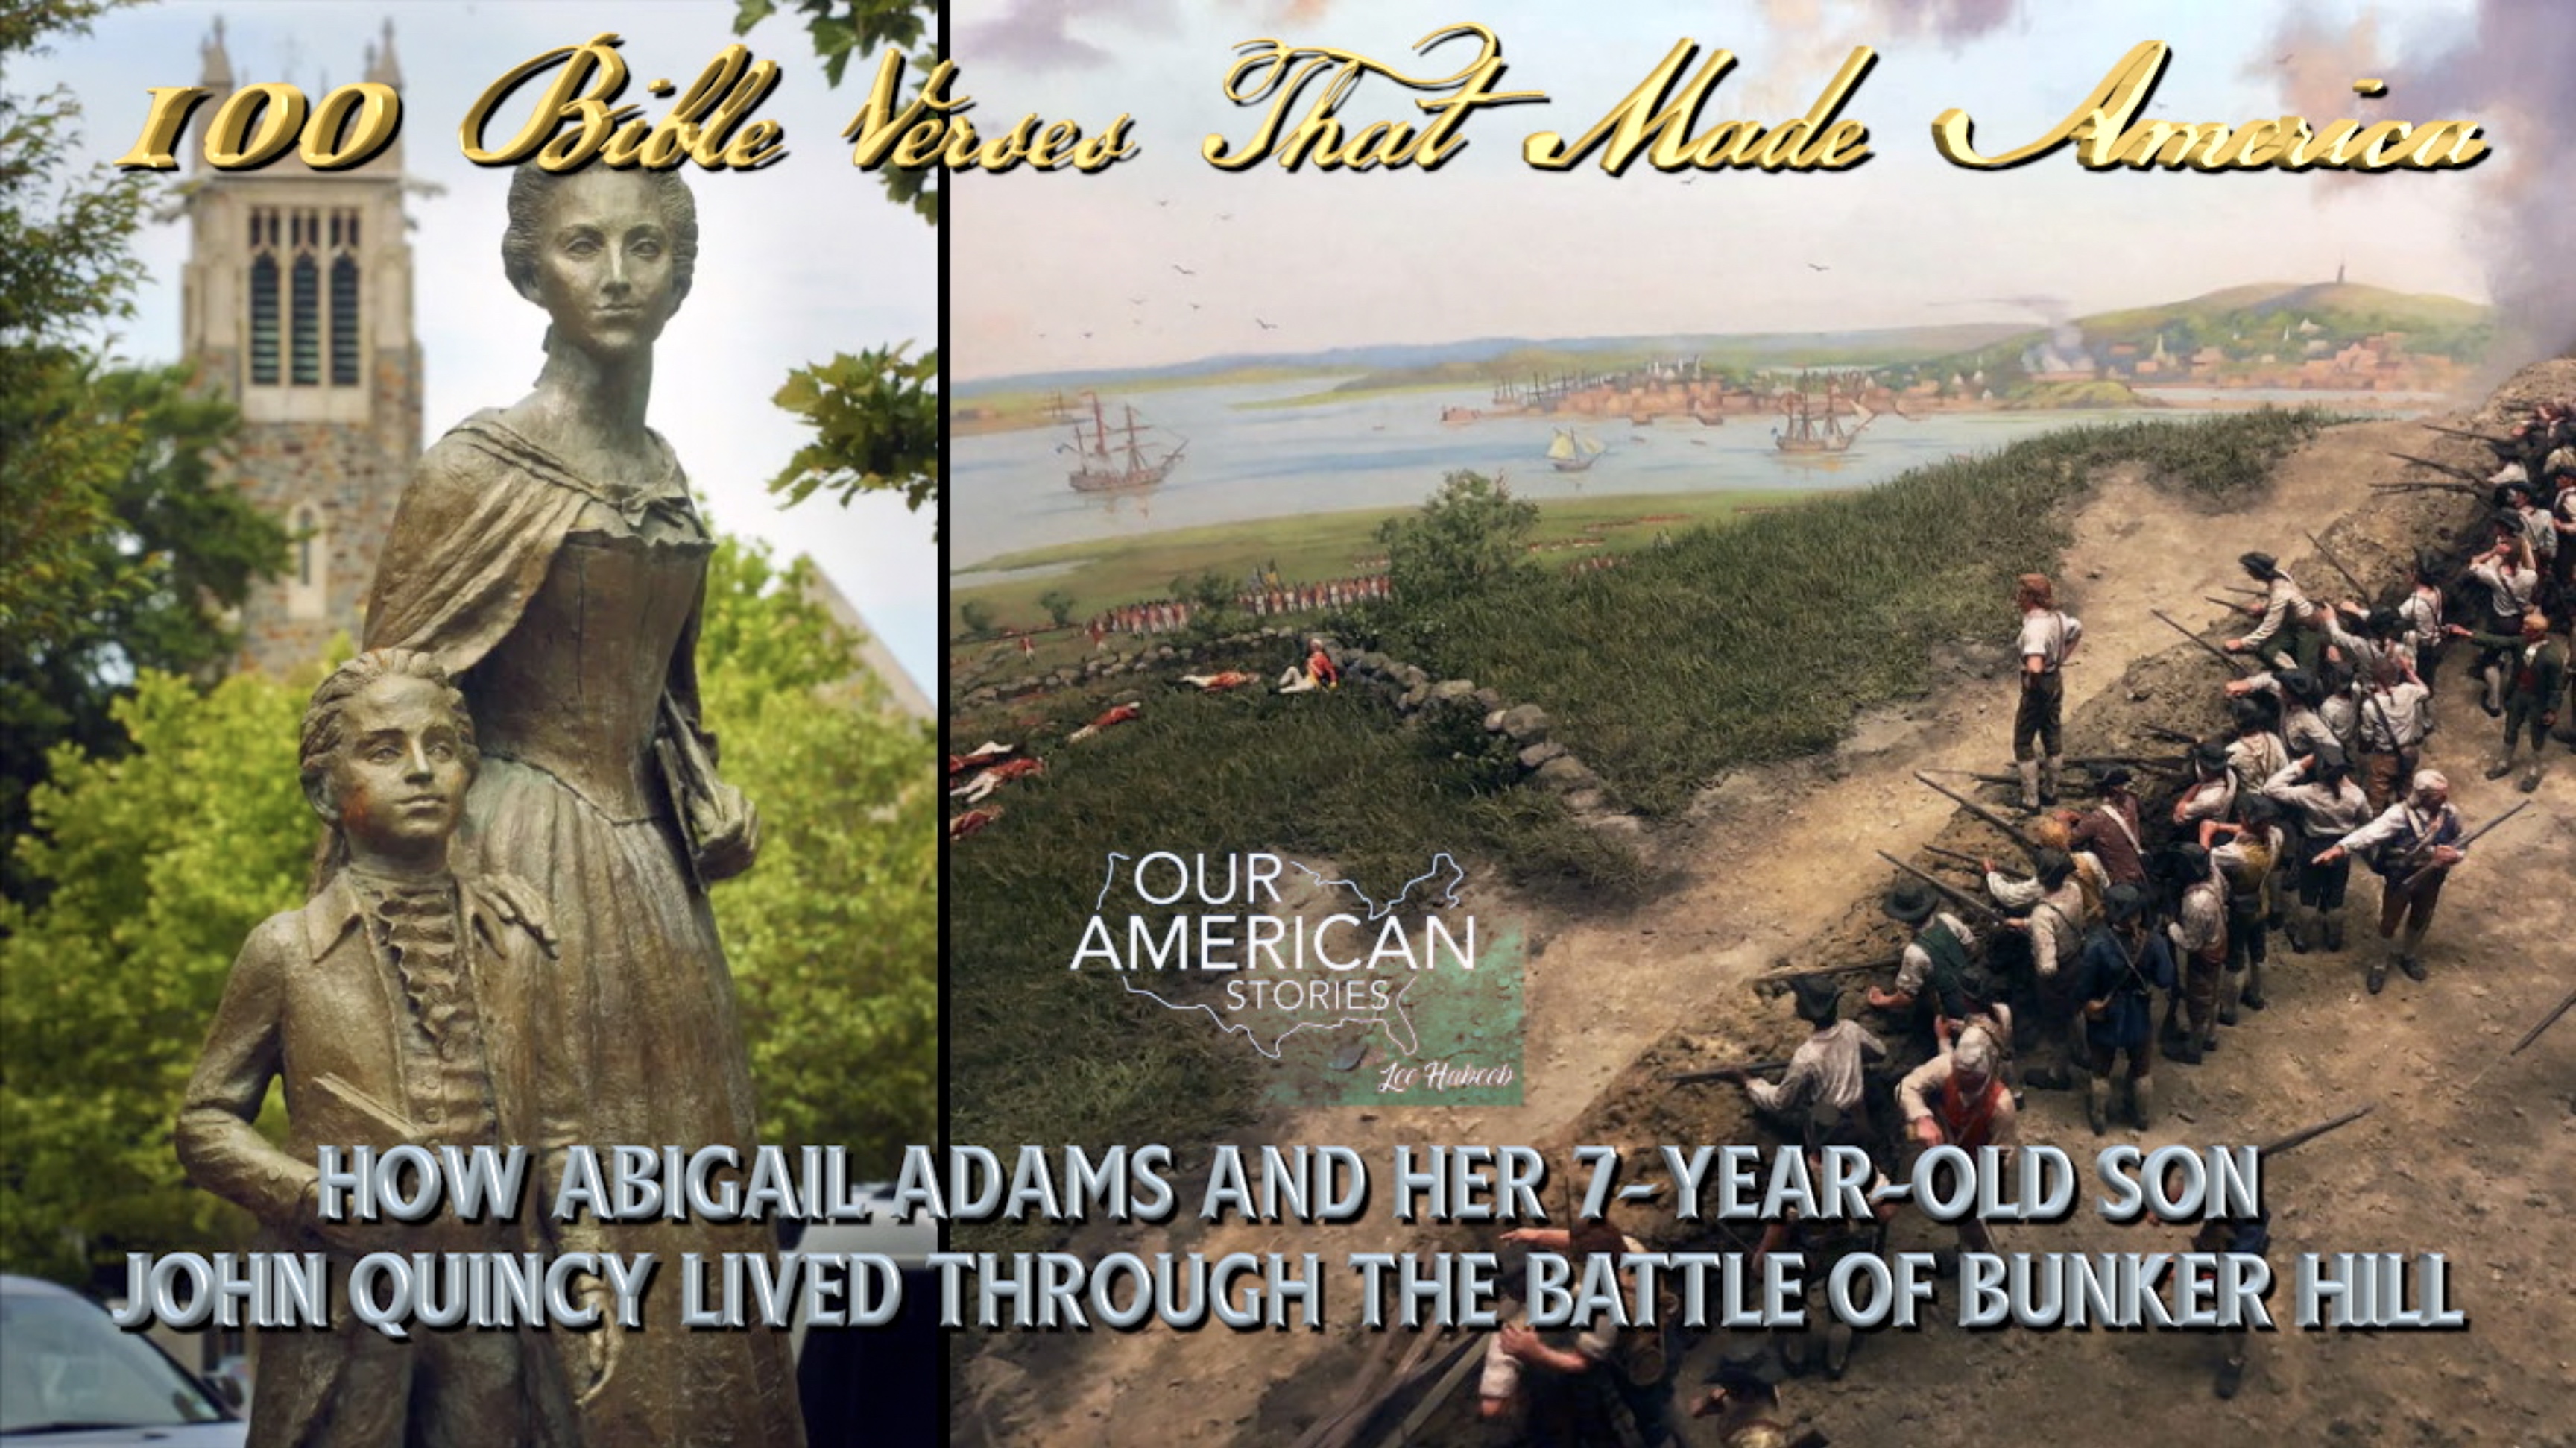 How Abigail Adams and Her 7-Year-Old Son John Quincy Lived through the Battle of Bunker Hill: 100 Bible Verses That Made America